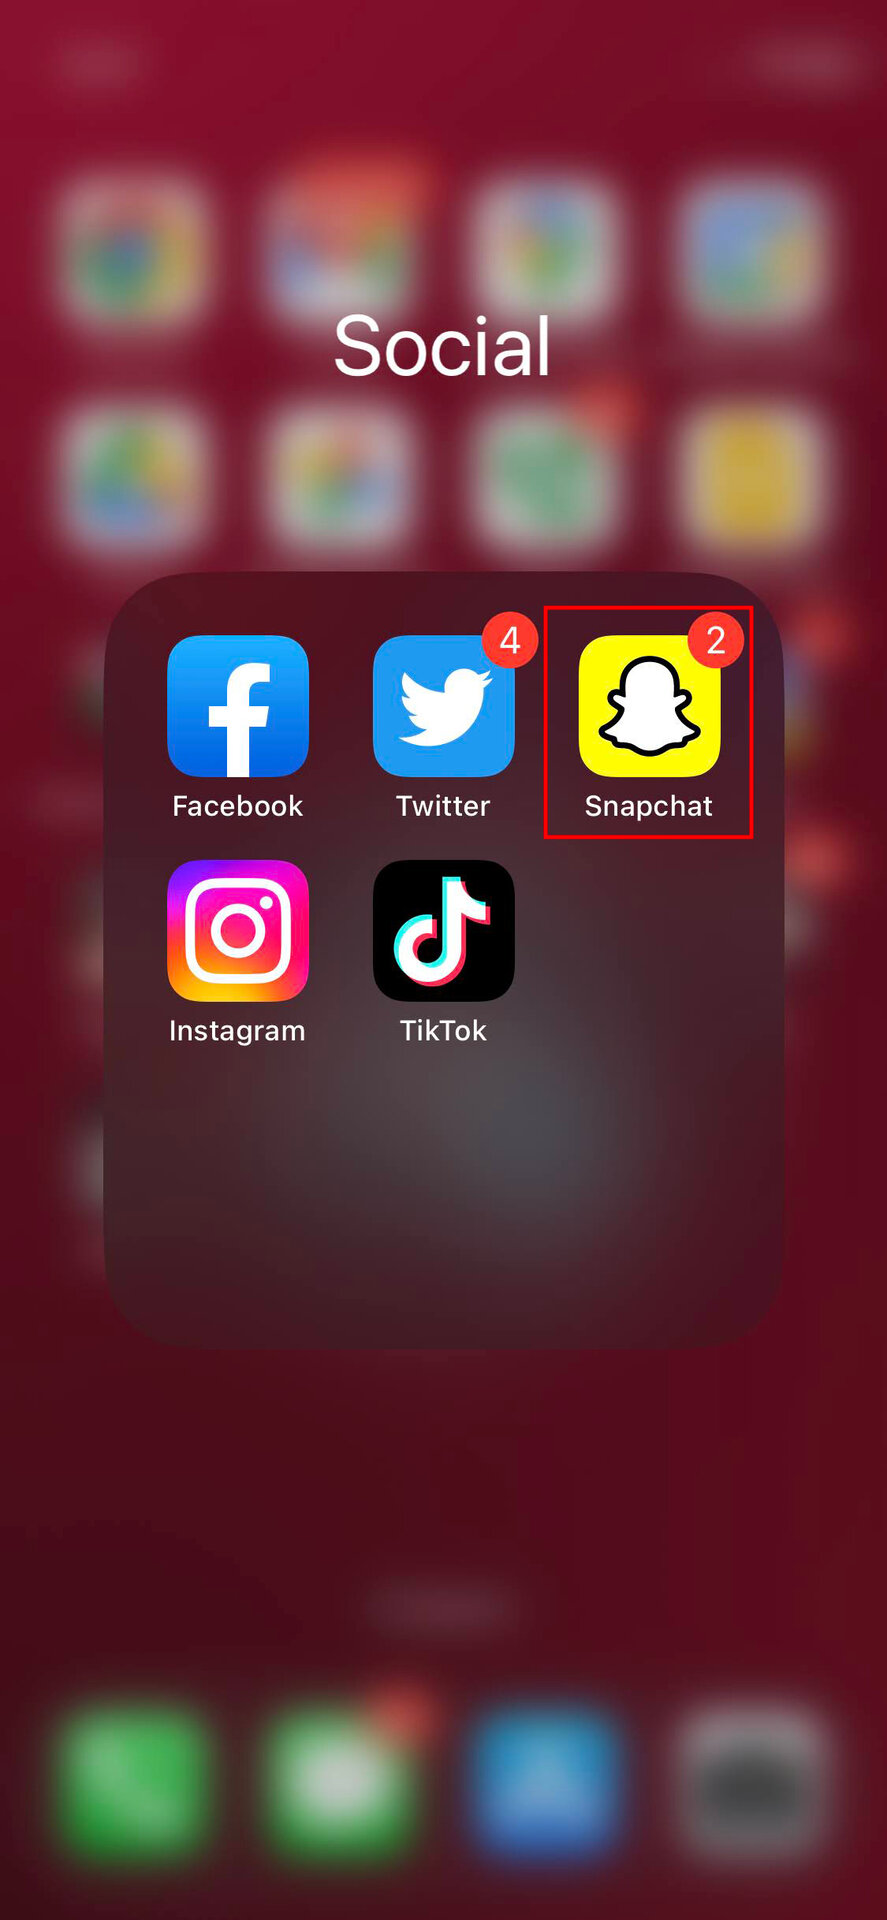 How to uninstall Snapchat on iPhone 1